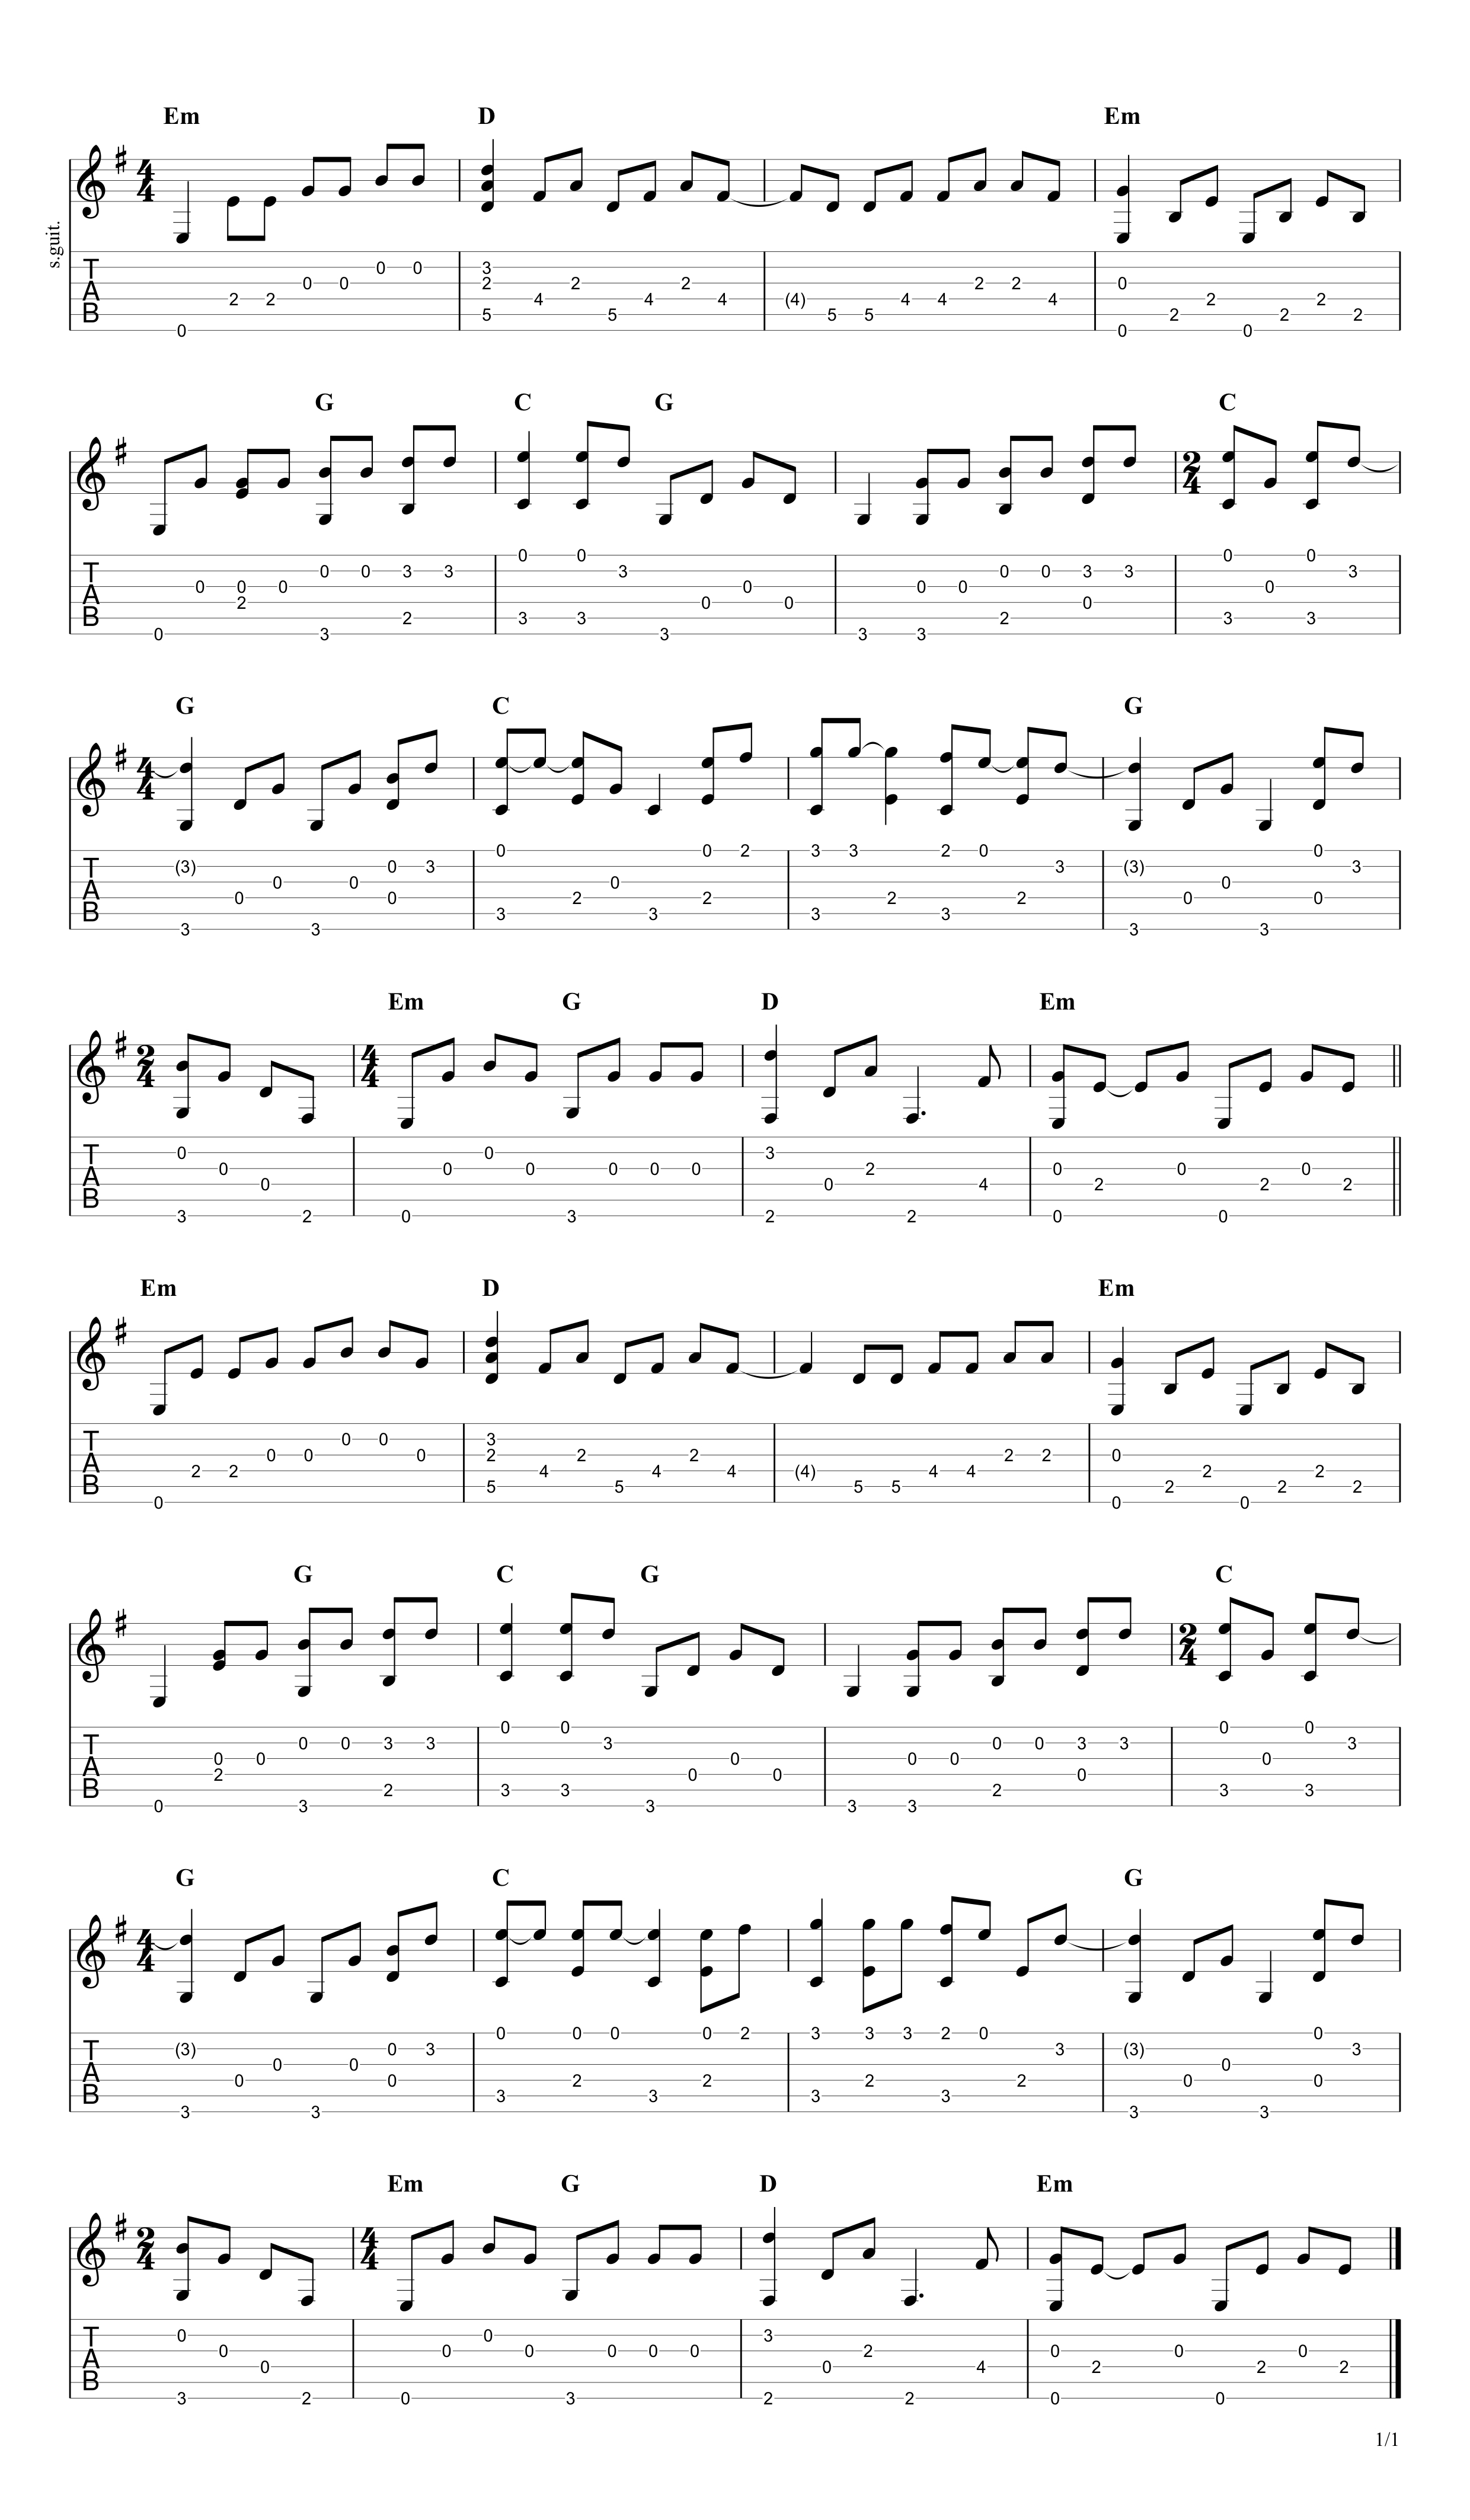 Sound Of Silence Chords How To Play The Sound Of Silence On Guitar Fingerstyle Arrangement